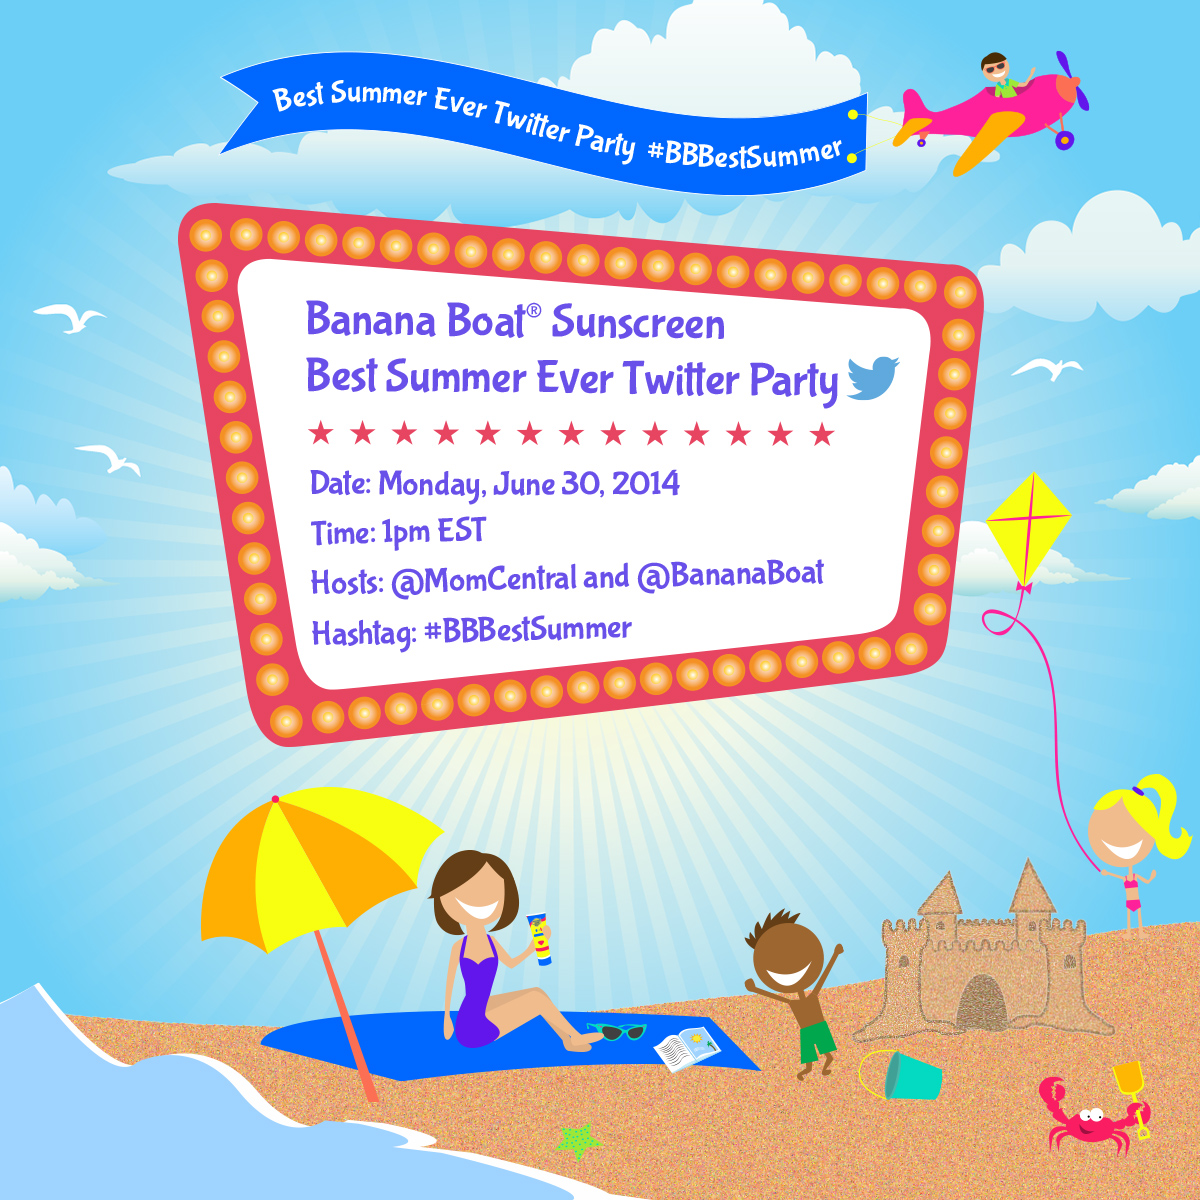 #BBBestSummer Twitter Party